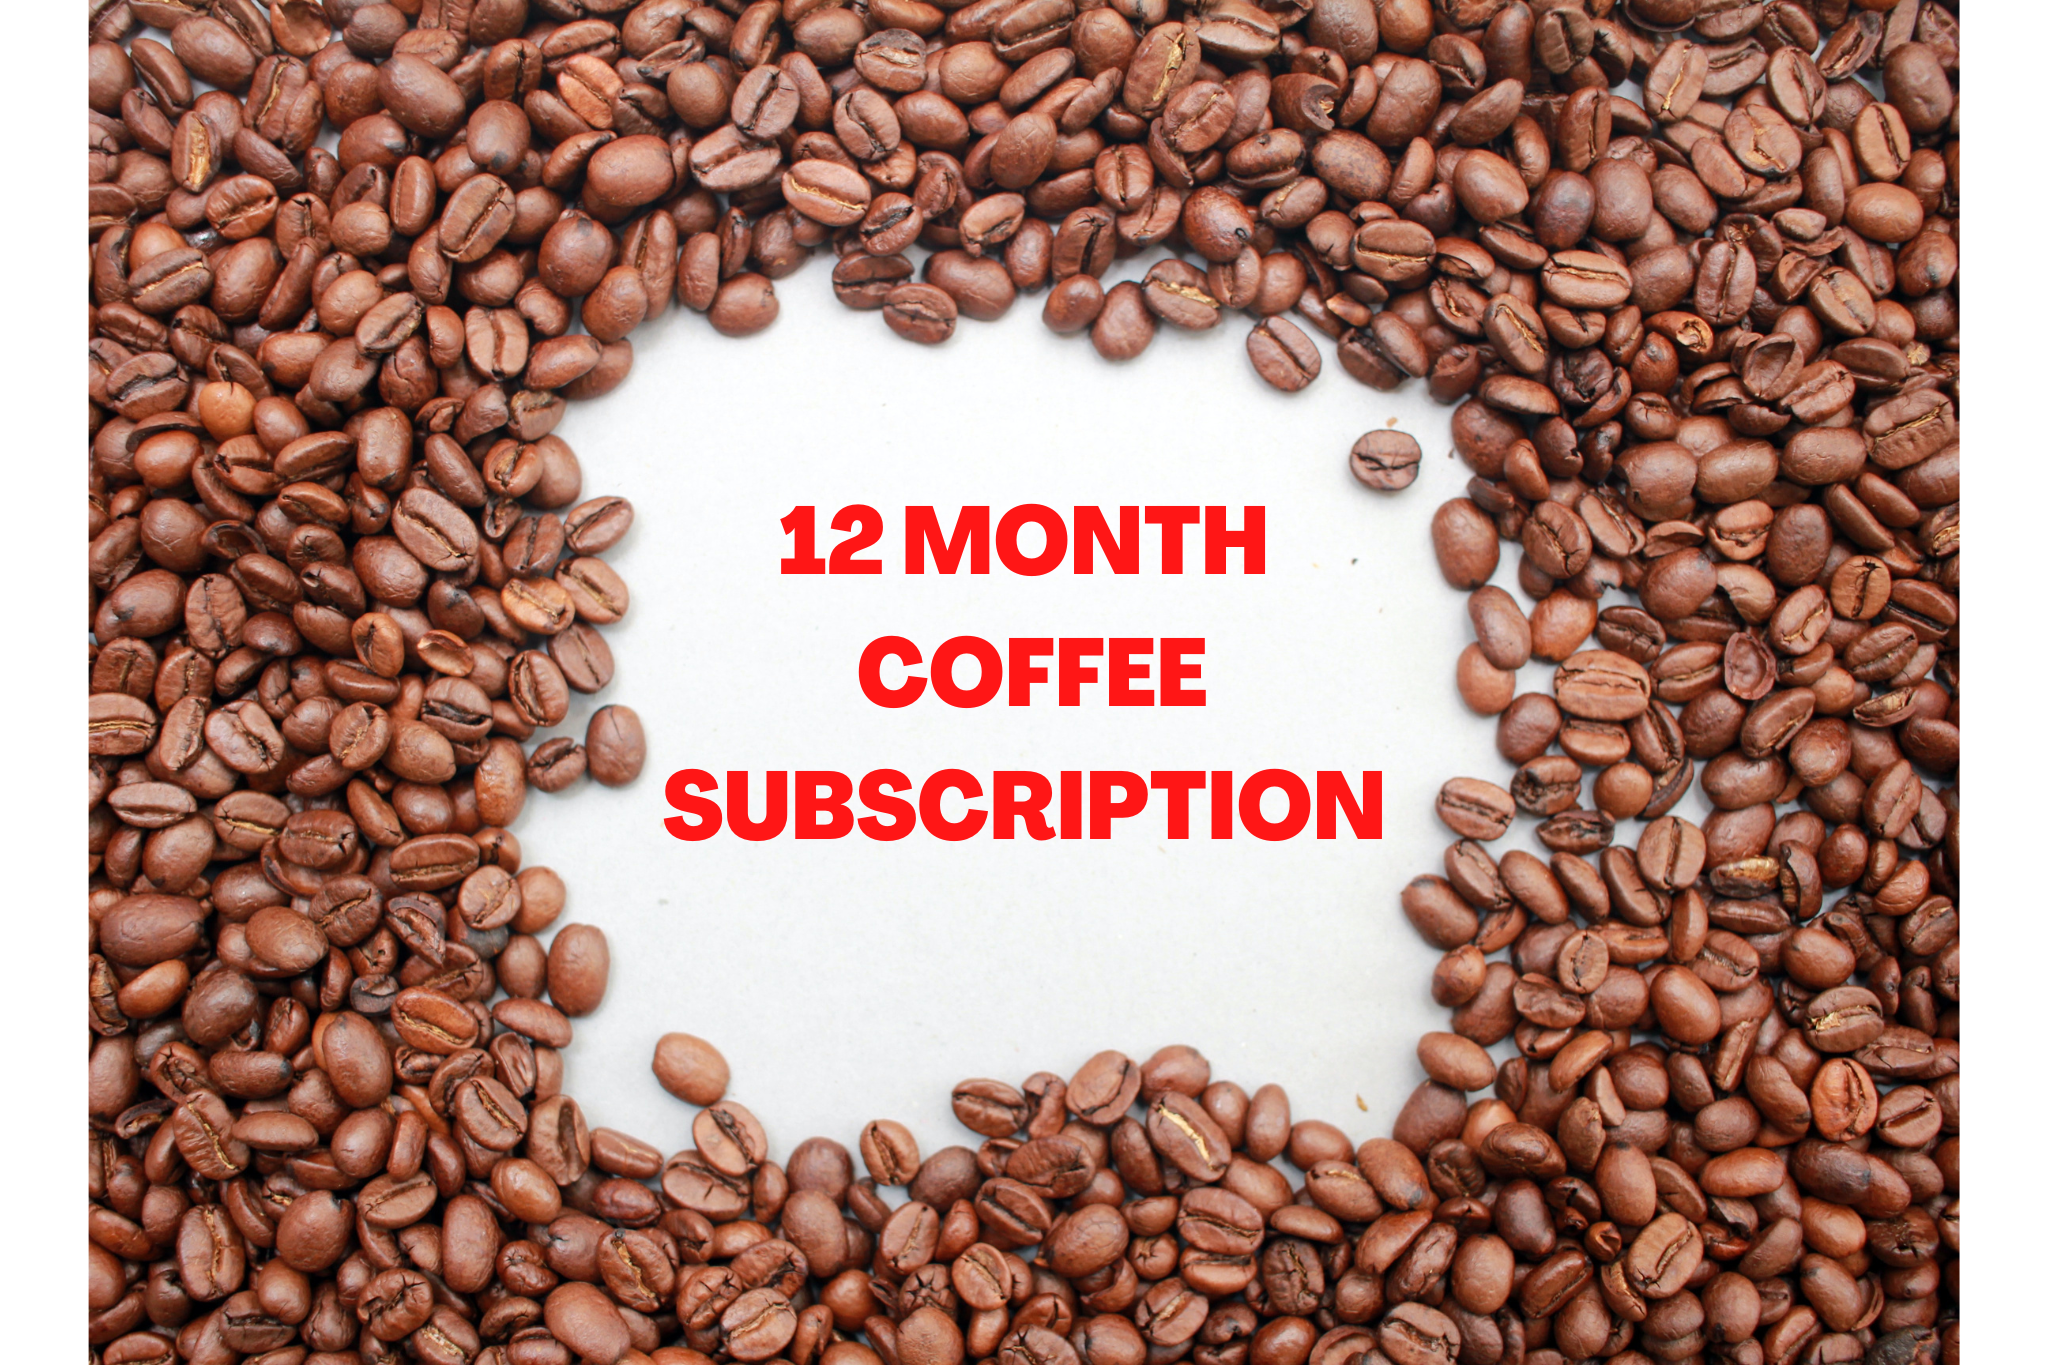 12 MONTH 12x COFFEE TASTING SUBSCRIPTION